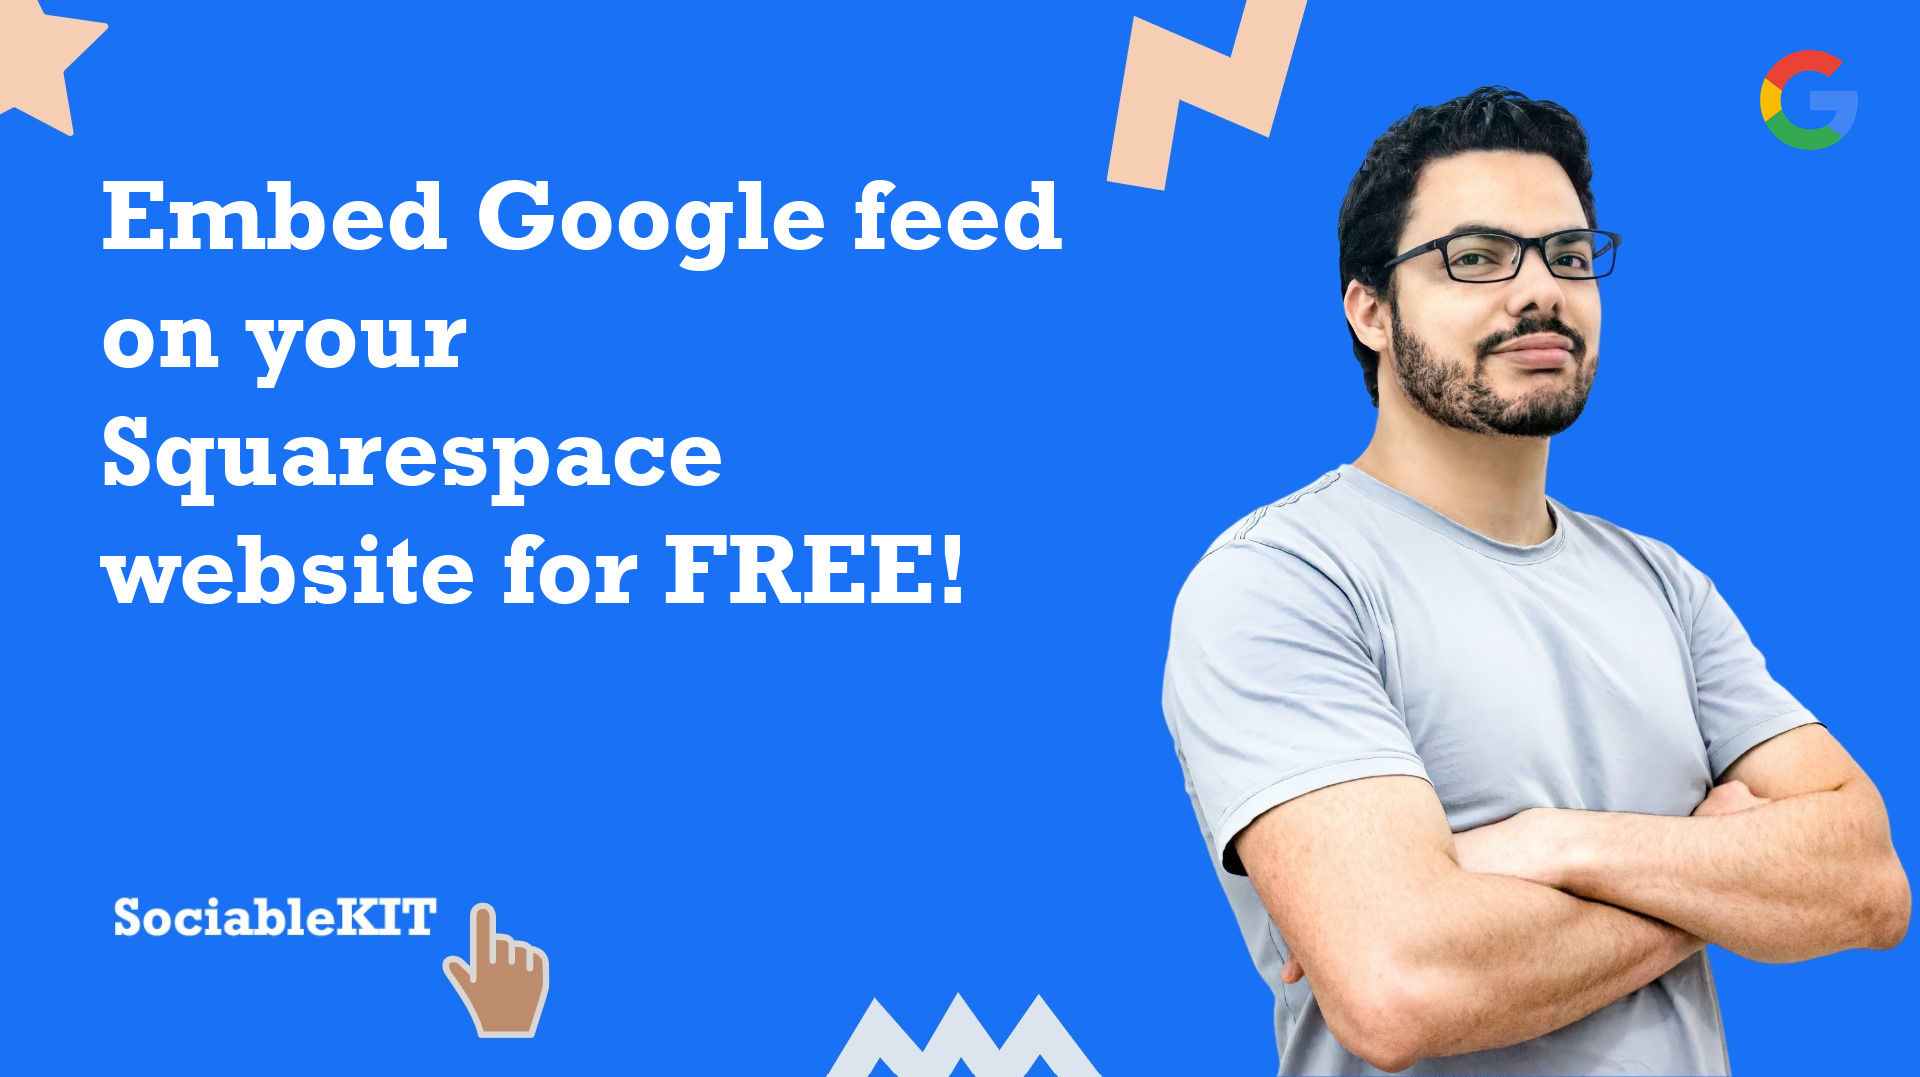 How to embed Google feed on your Squarespace website for FREE?